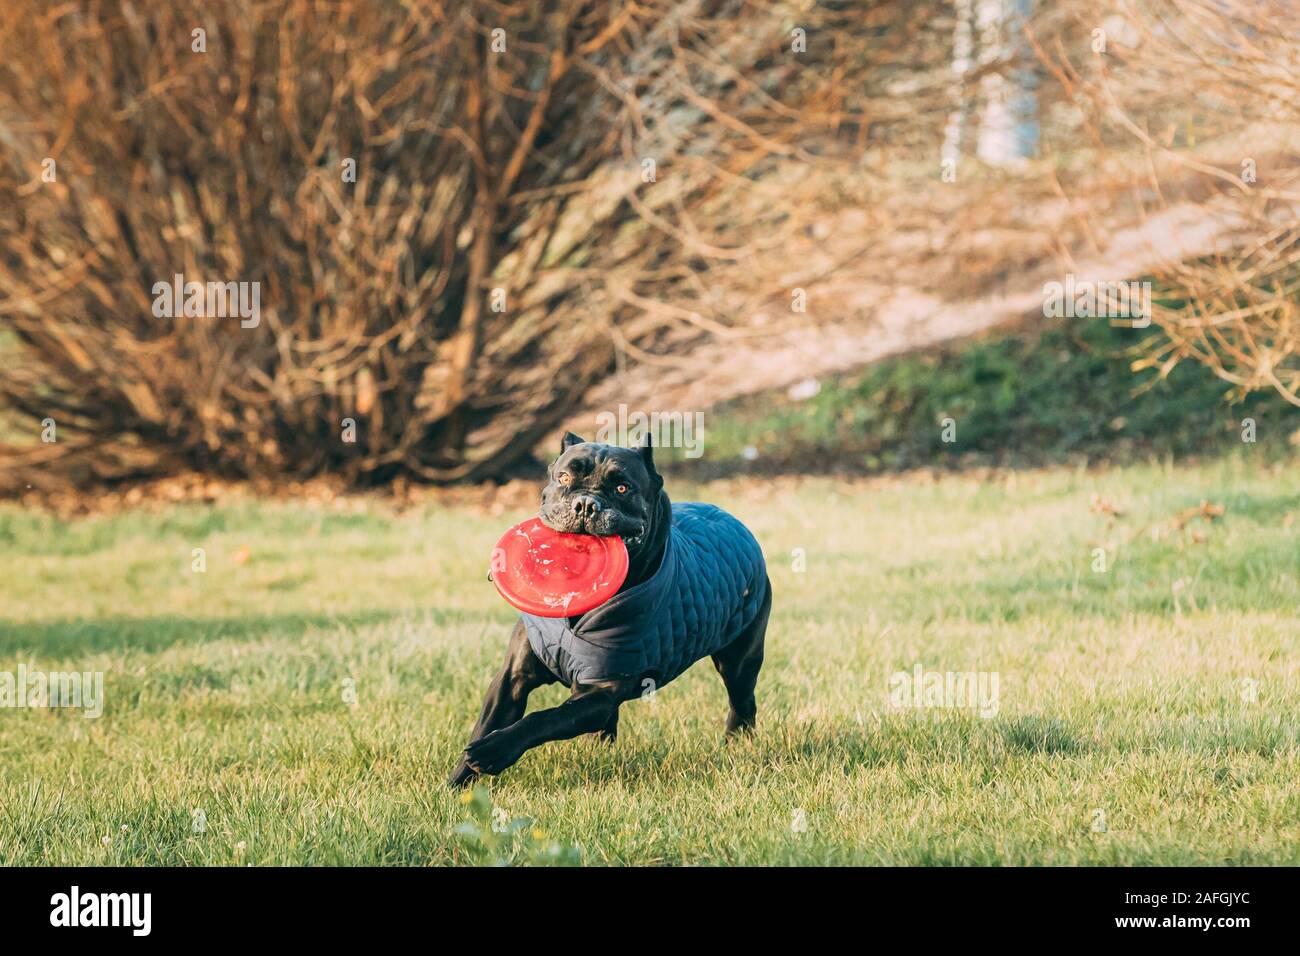 cane corso clothing for dogs